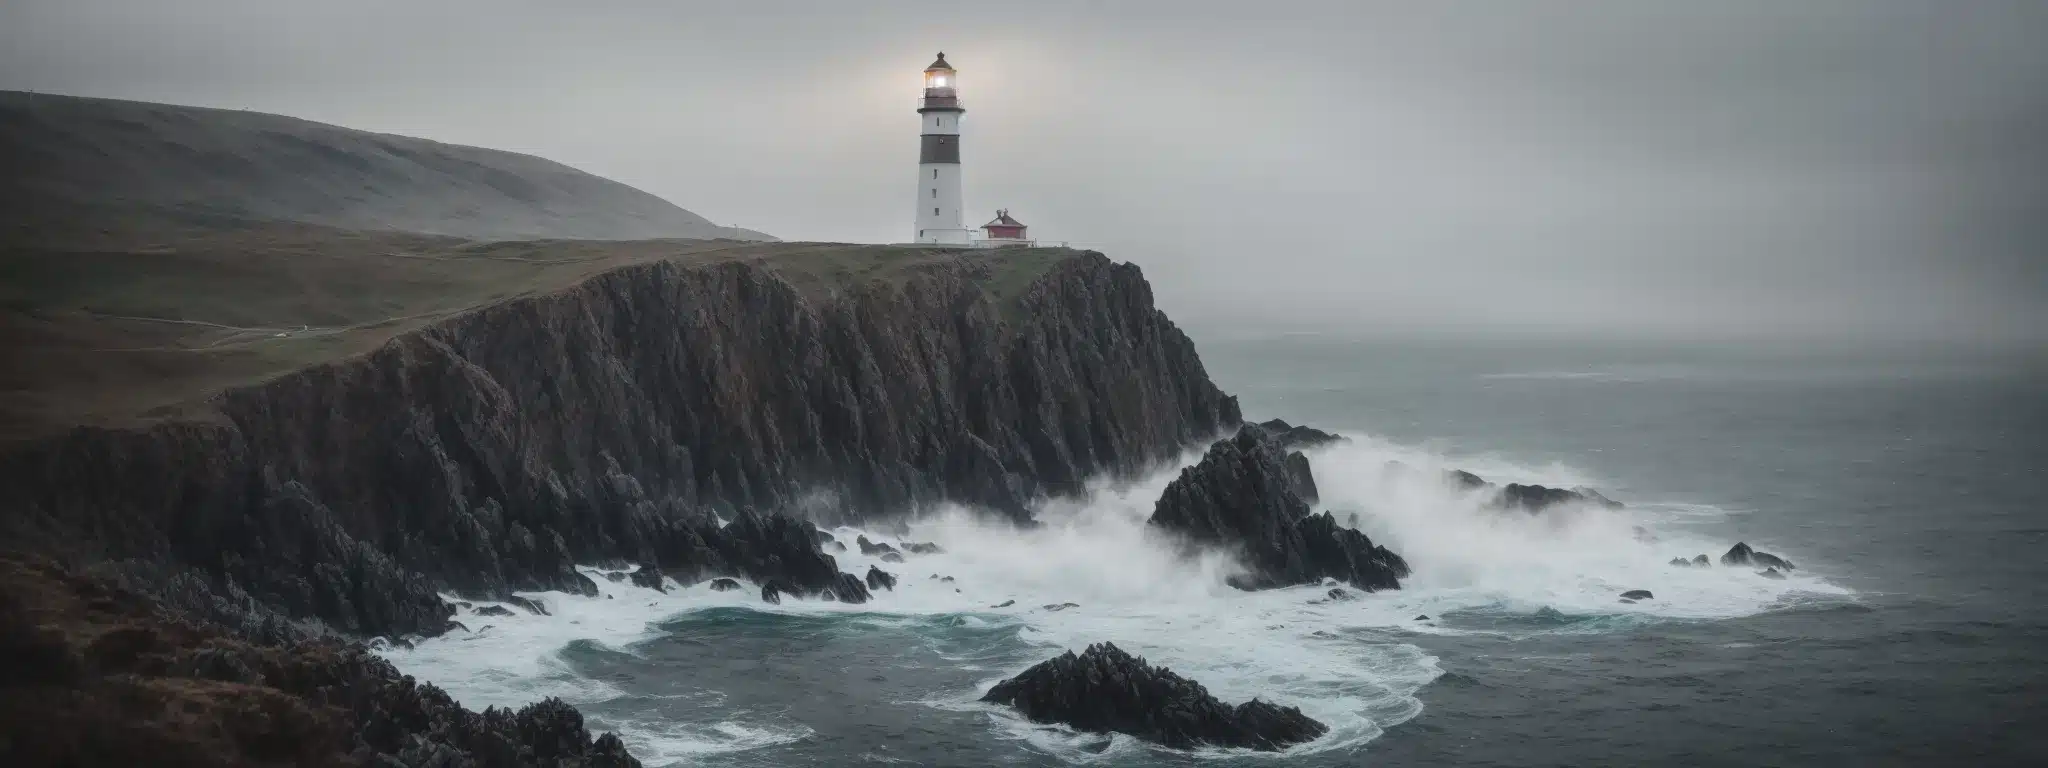 A Majestic Lighthouse Stands Firm On A Rugged Coastline, Its Bright Beacon Cutting Through The Mist, A Vigilant Sentinel Amid The Vast, Churning Sea.